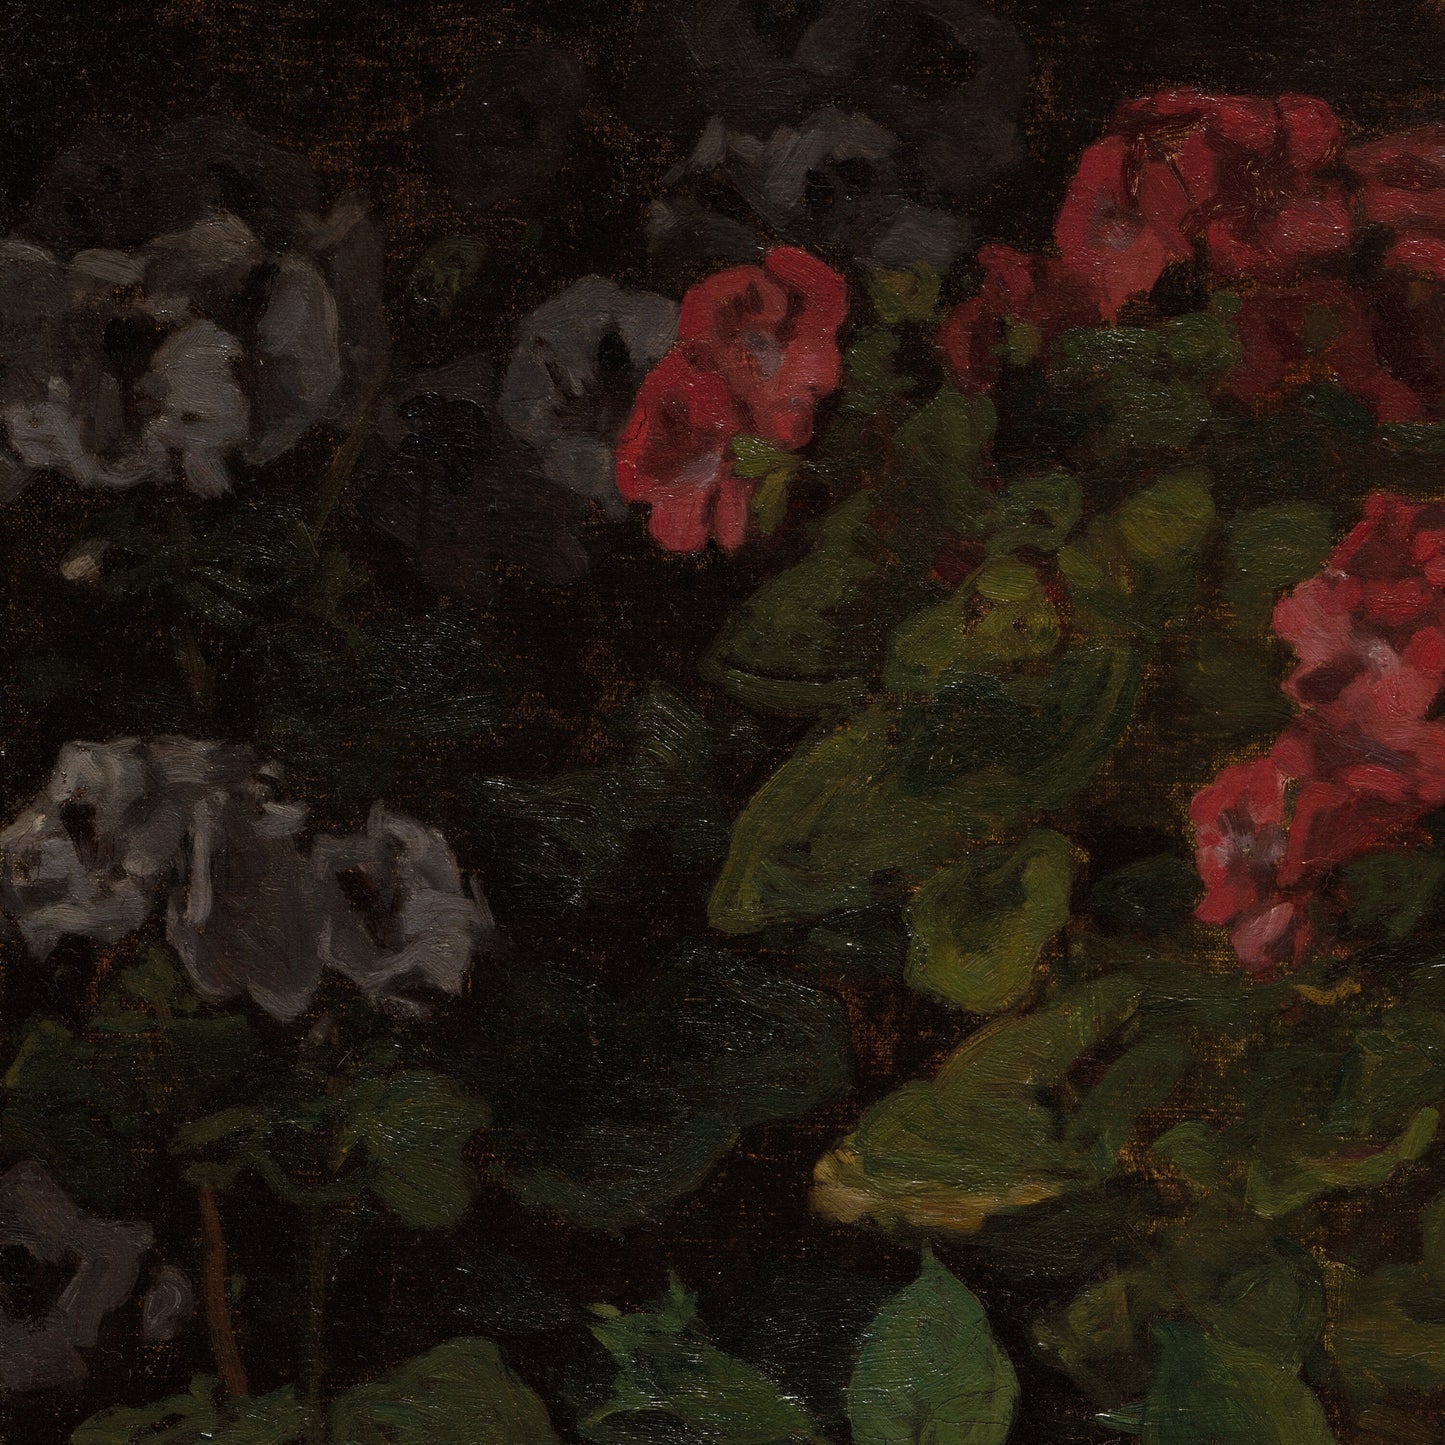 Spring Flowers by Monet,3d Printed with texture and brush strokes looks like original oil-painting,code:695